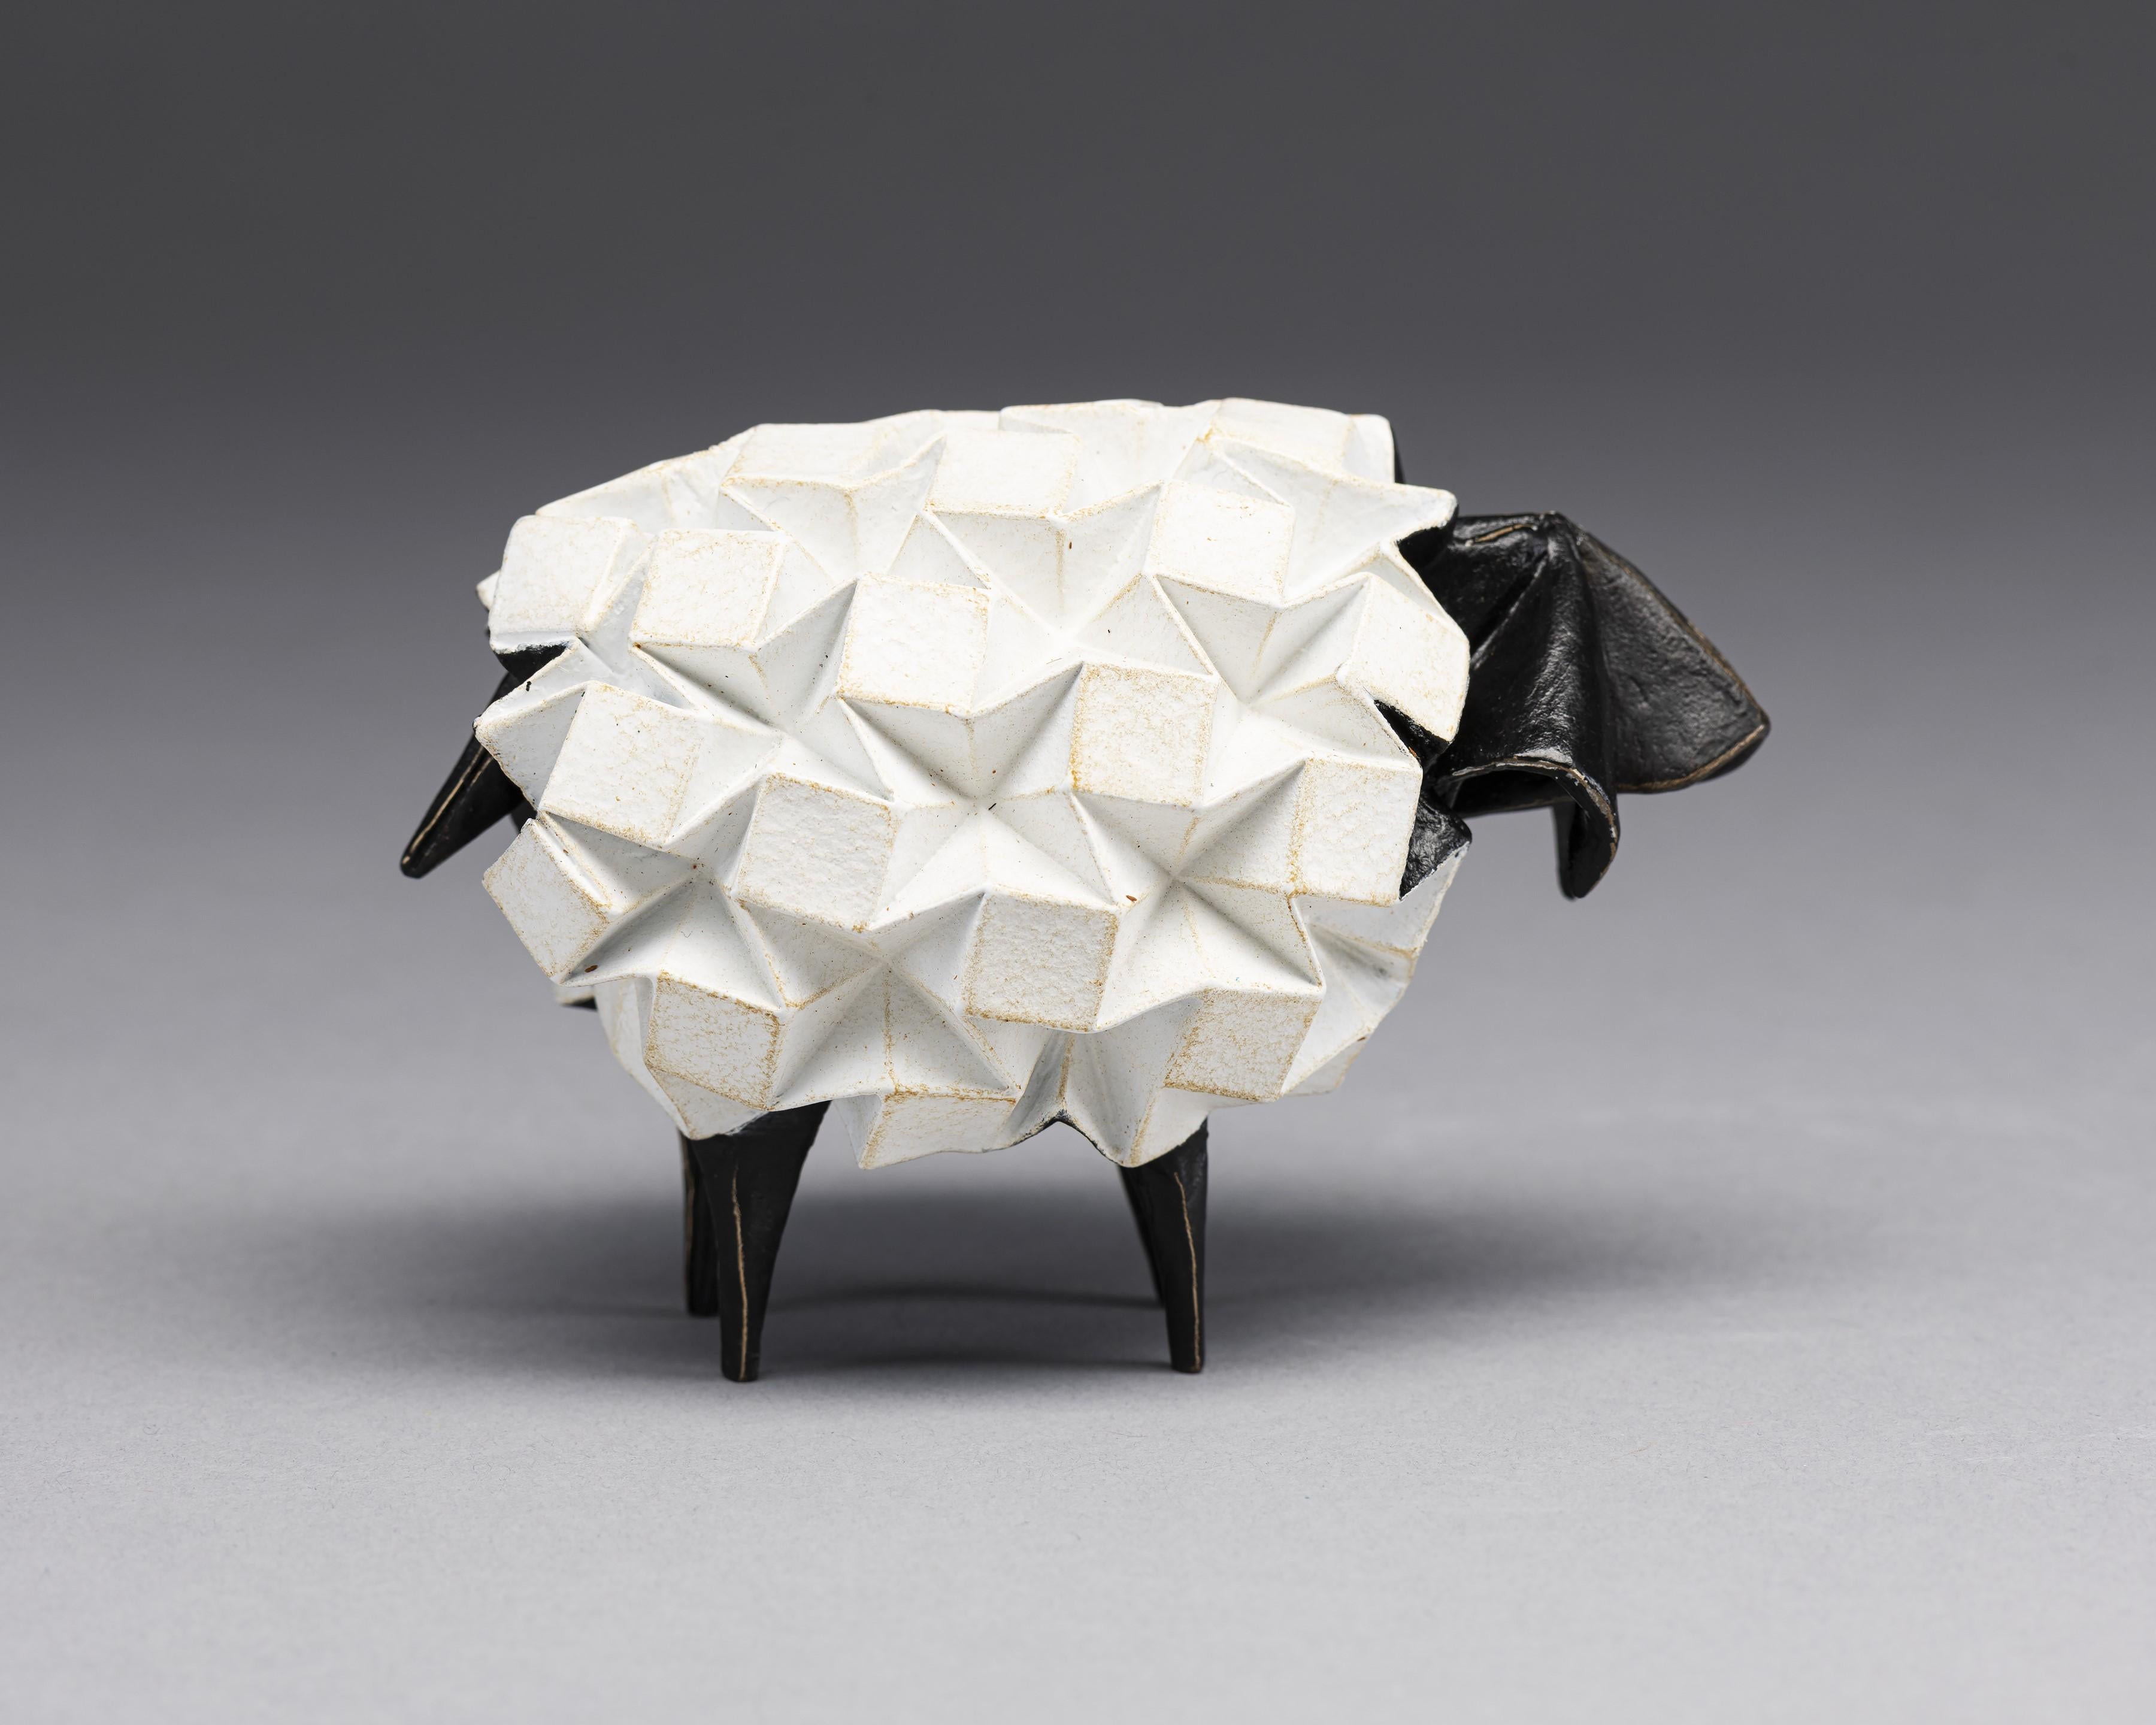 Kevin Box Abstract Sculpture - Ewe and Me (white) 84/500